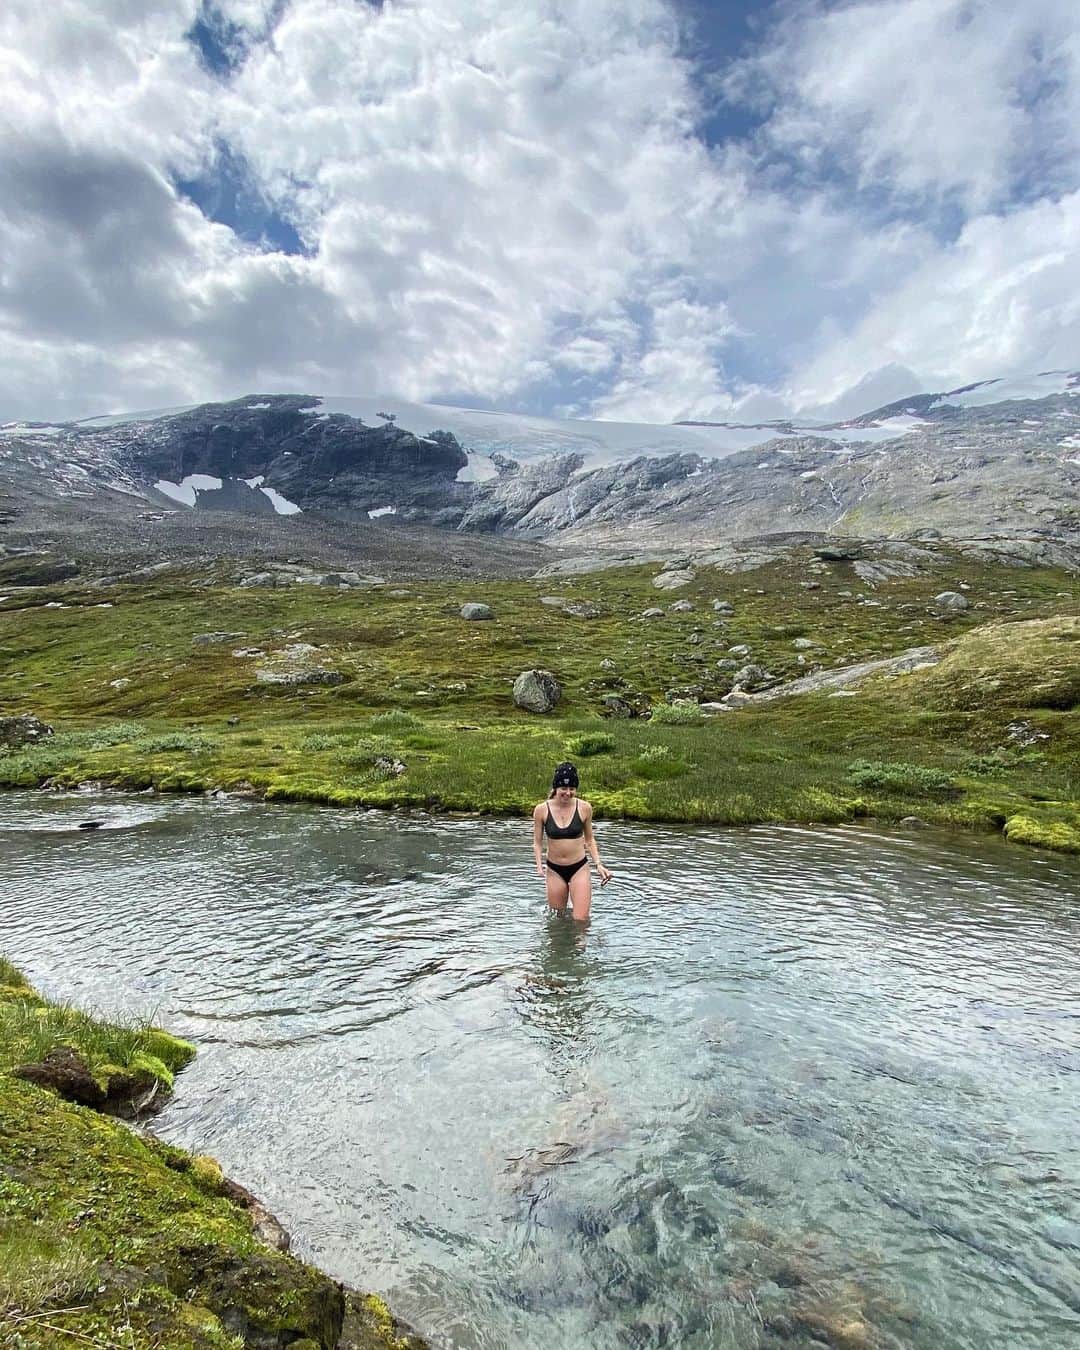 Anna Grimaldiのインスタグラム：「Summer in Norway ❄️🩵 Icy swims in a beanie under a snowy mountain, can’t get much more summery than that, Norway you stunner ✨」